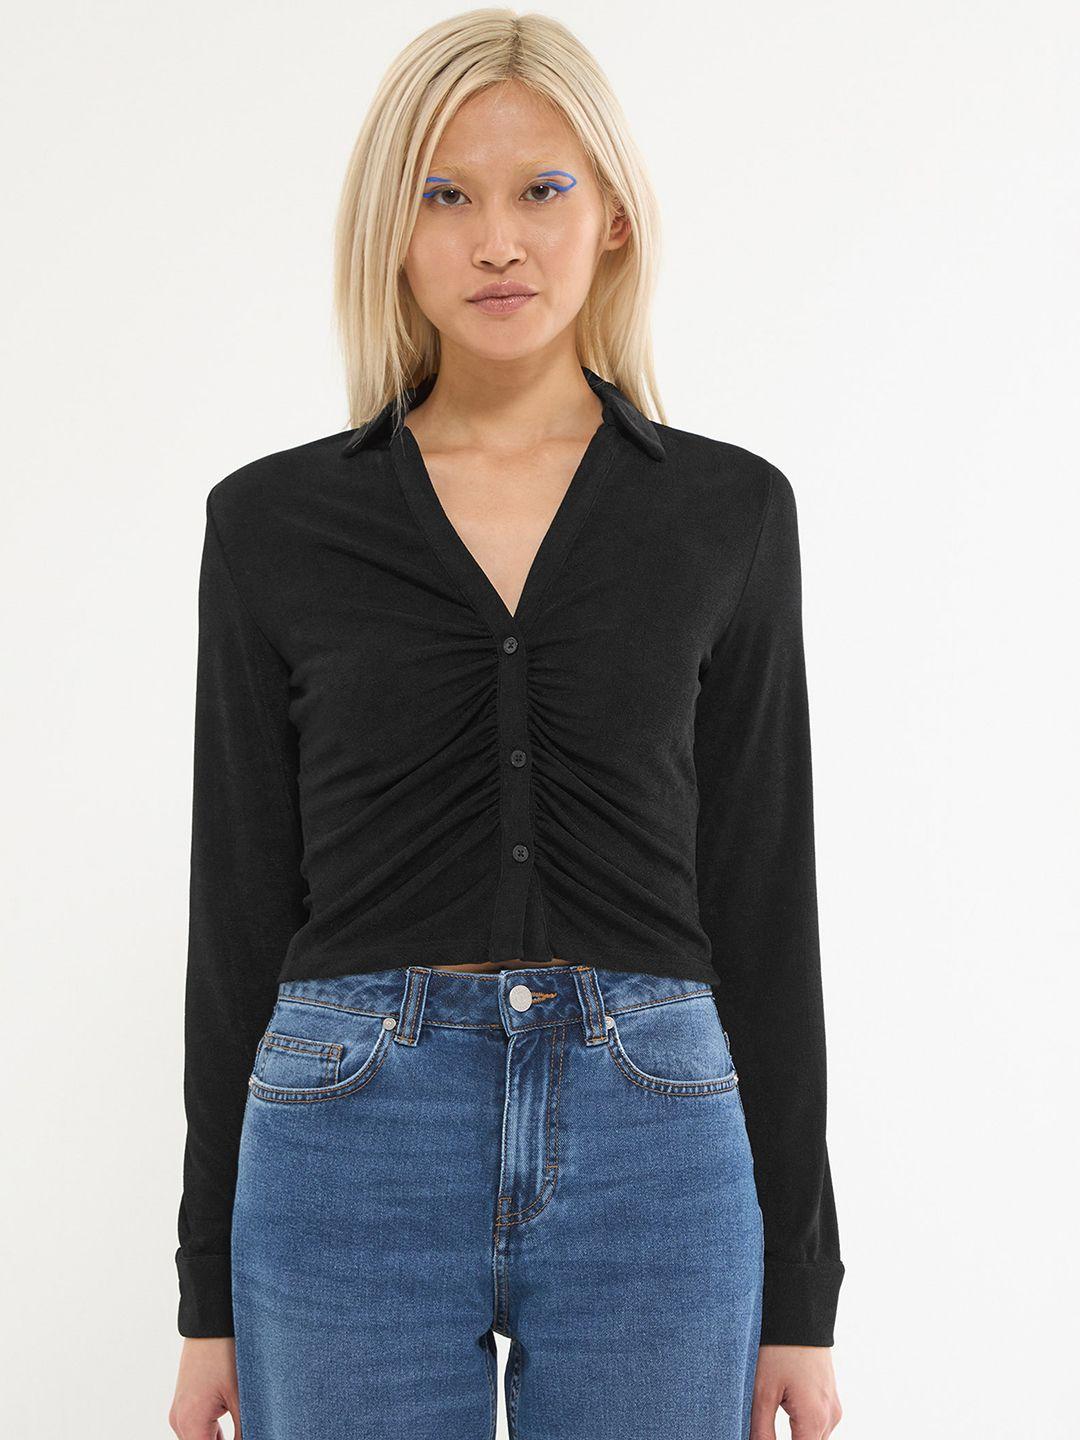 terranova ruched detail shirt style top